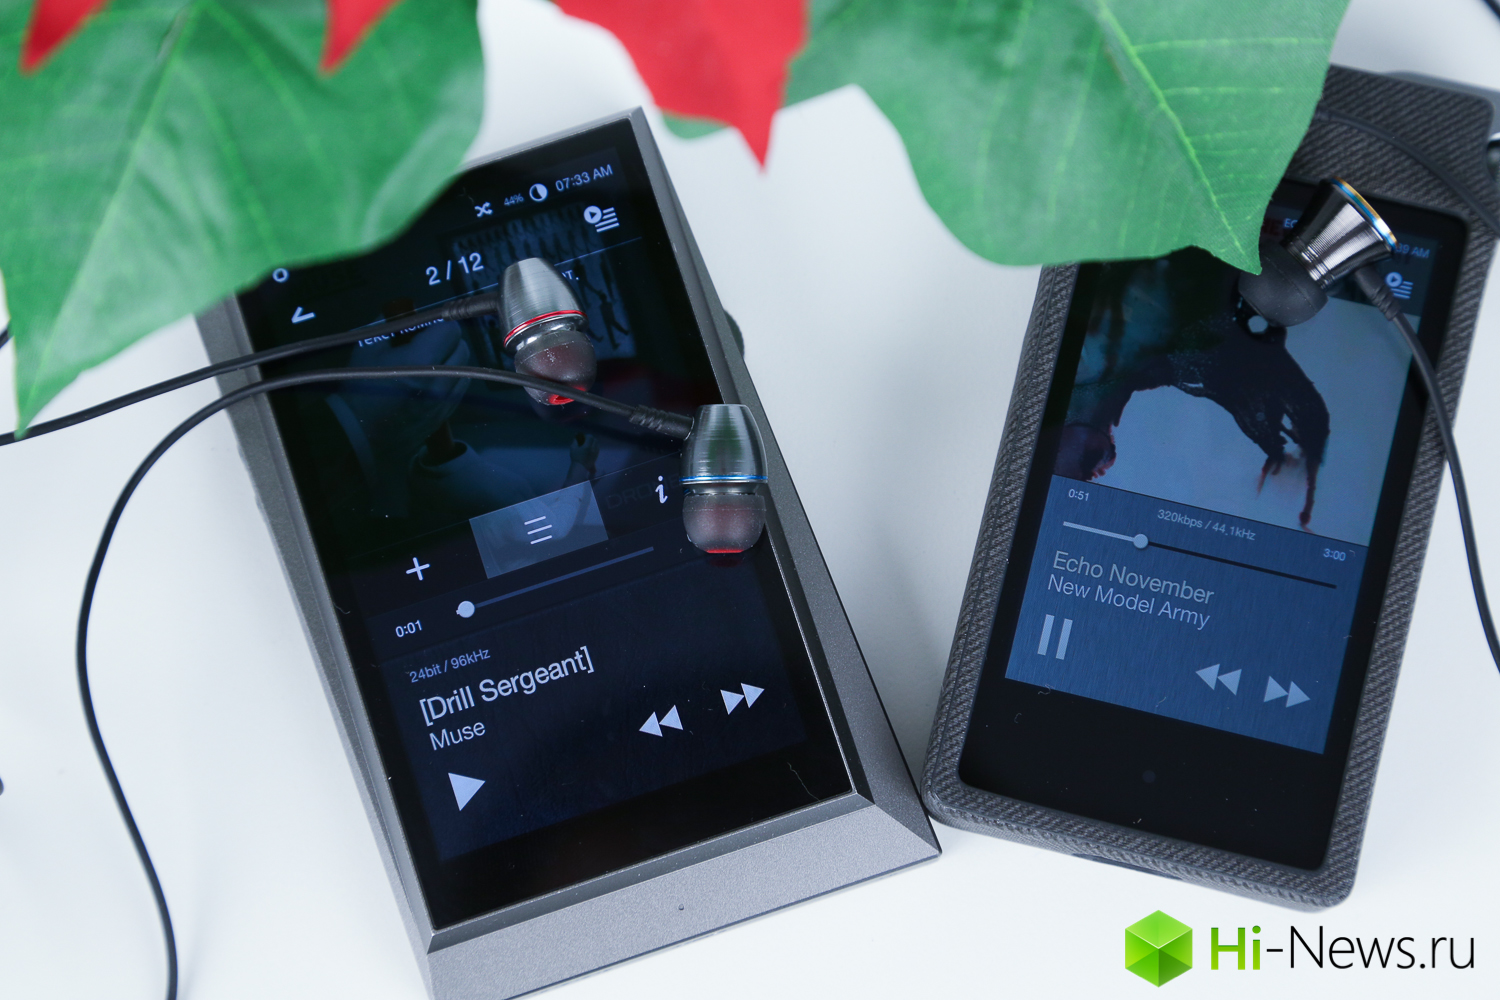 Budget headphones Dunu and player Astell&Kern. What happens?